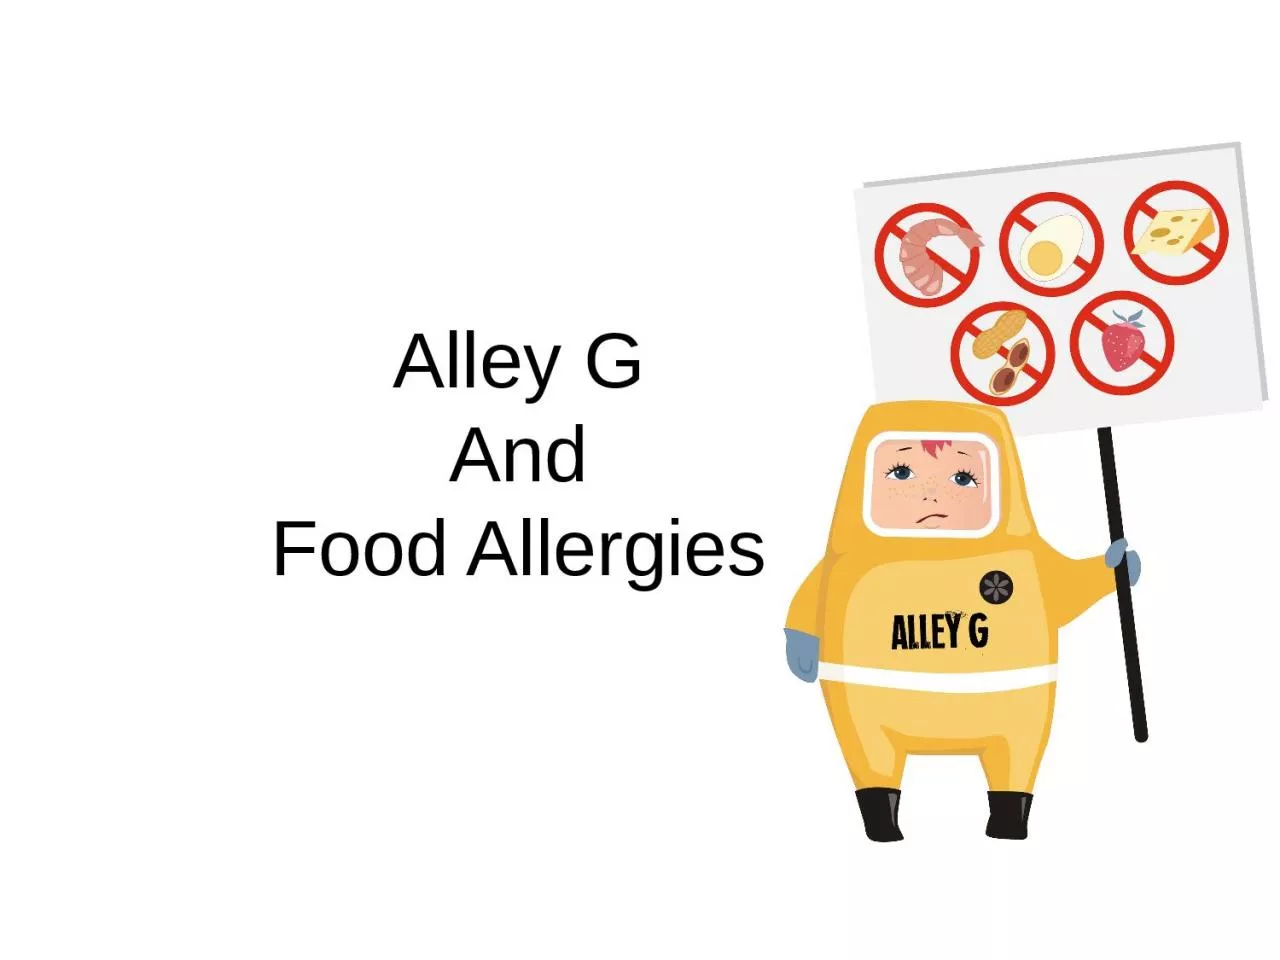 Alley G And Food Allergies